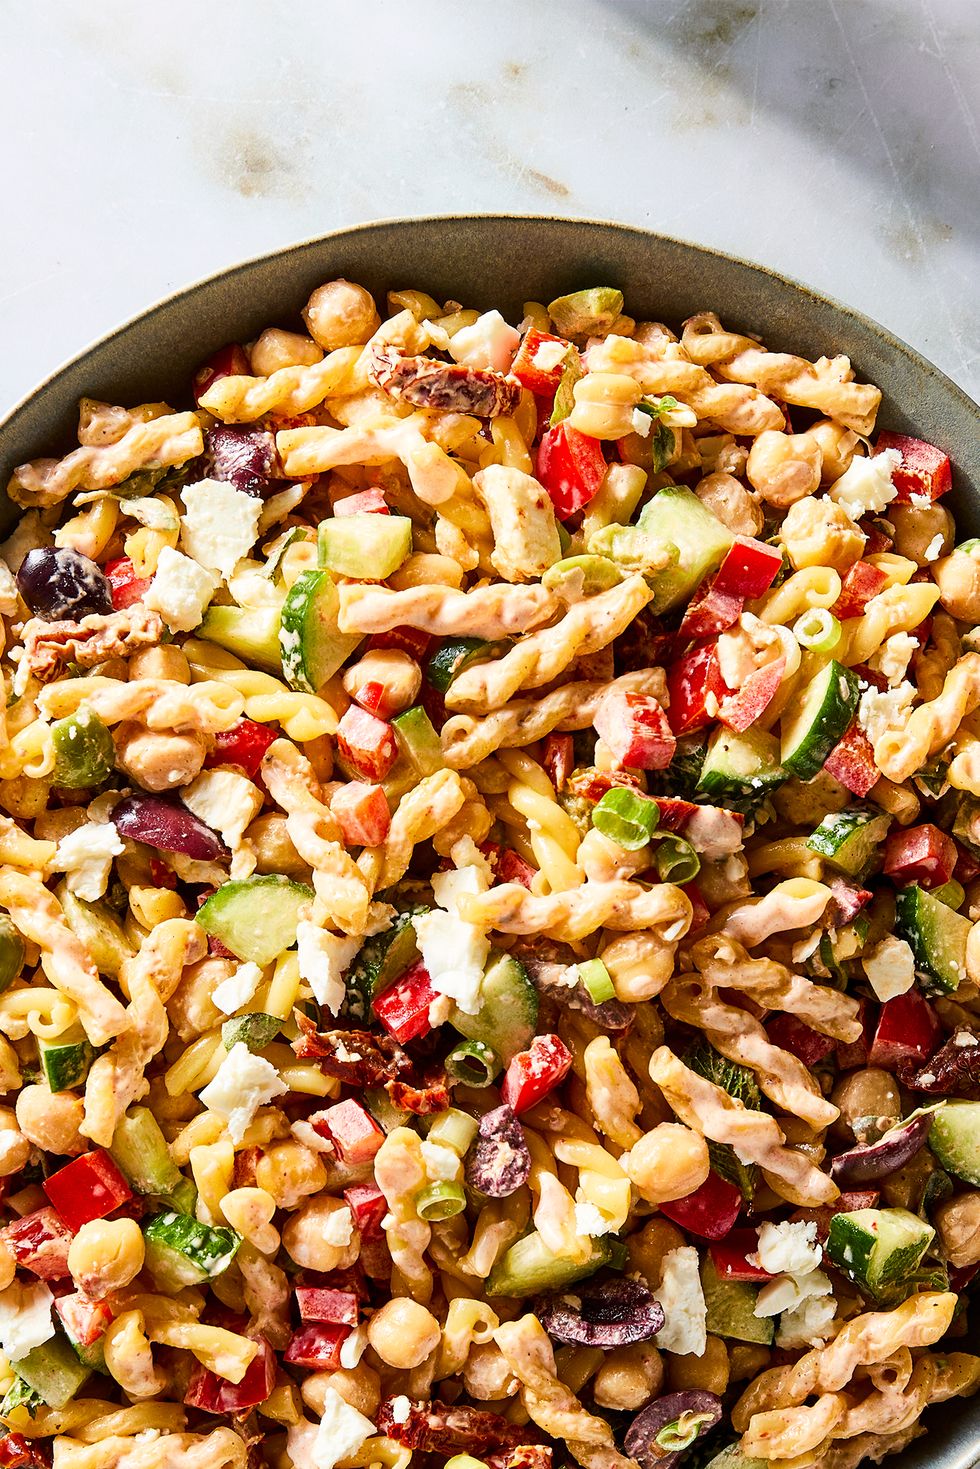 gemelli pasta tossed with chickpeas, bell pepper, cucumber, scallions, feta, olives, herbs, and tomatoes, then tossed in harissa mayo